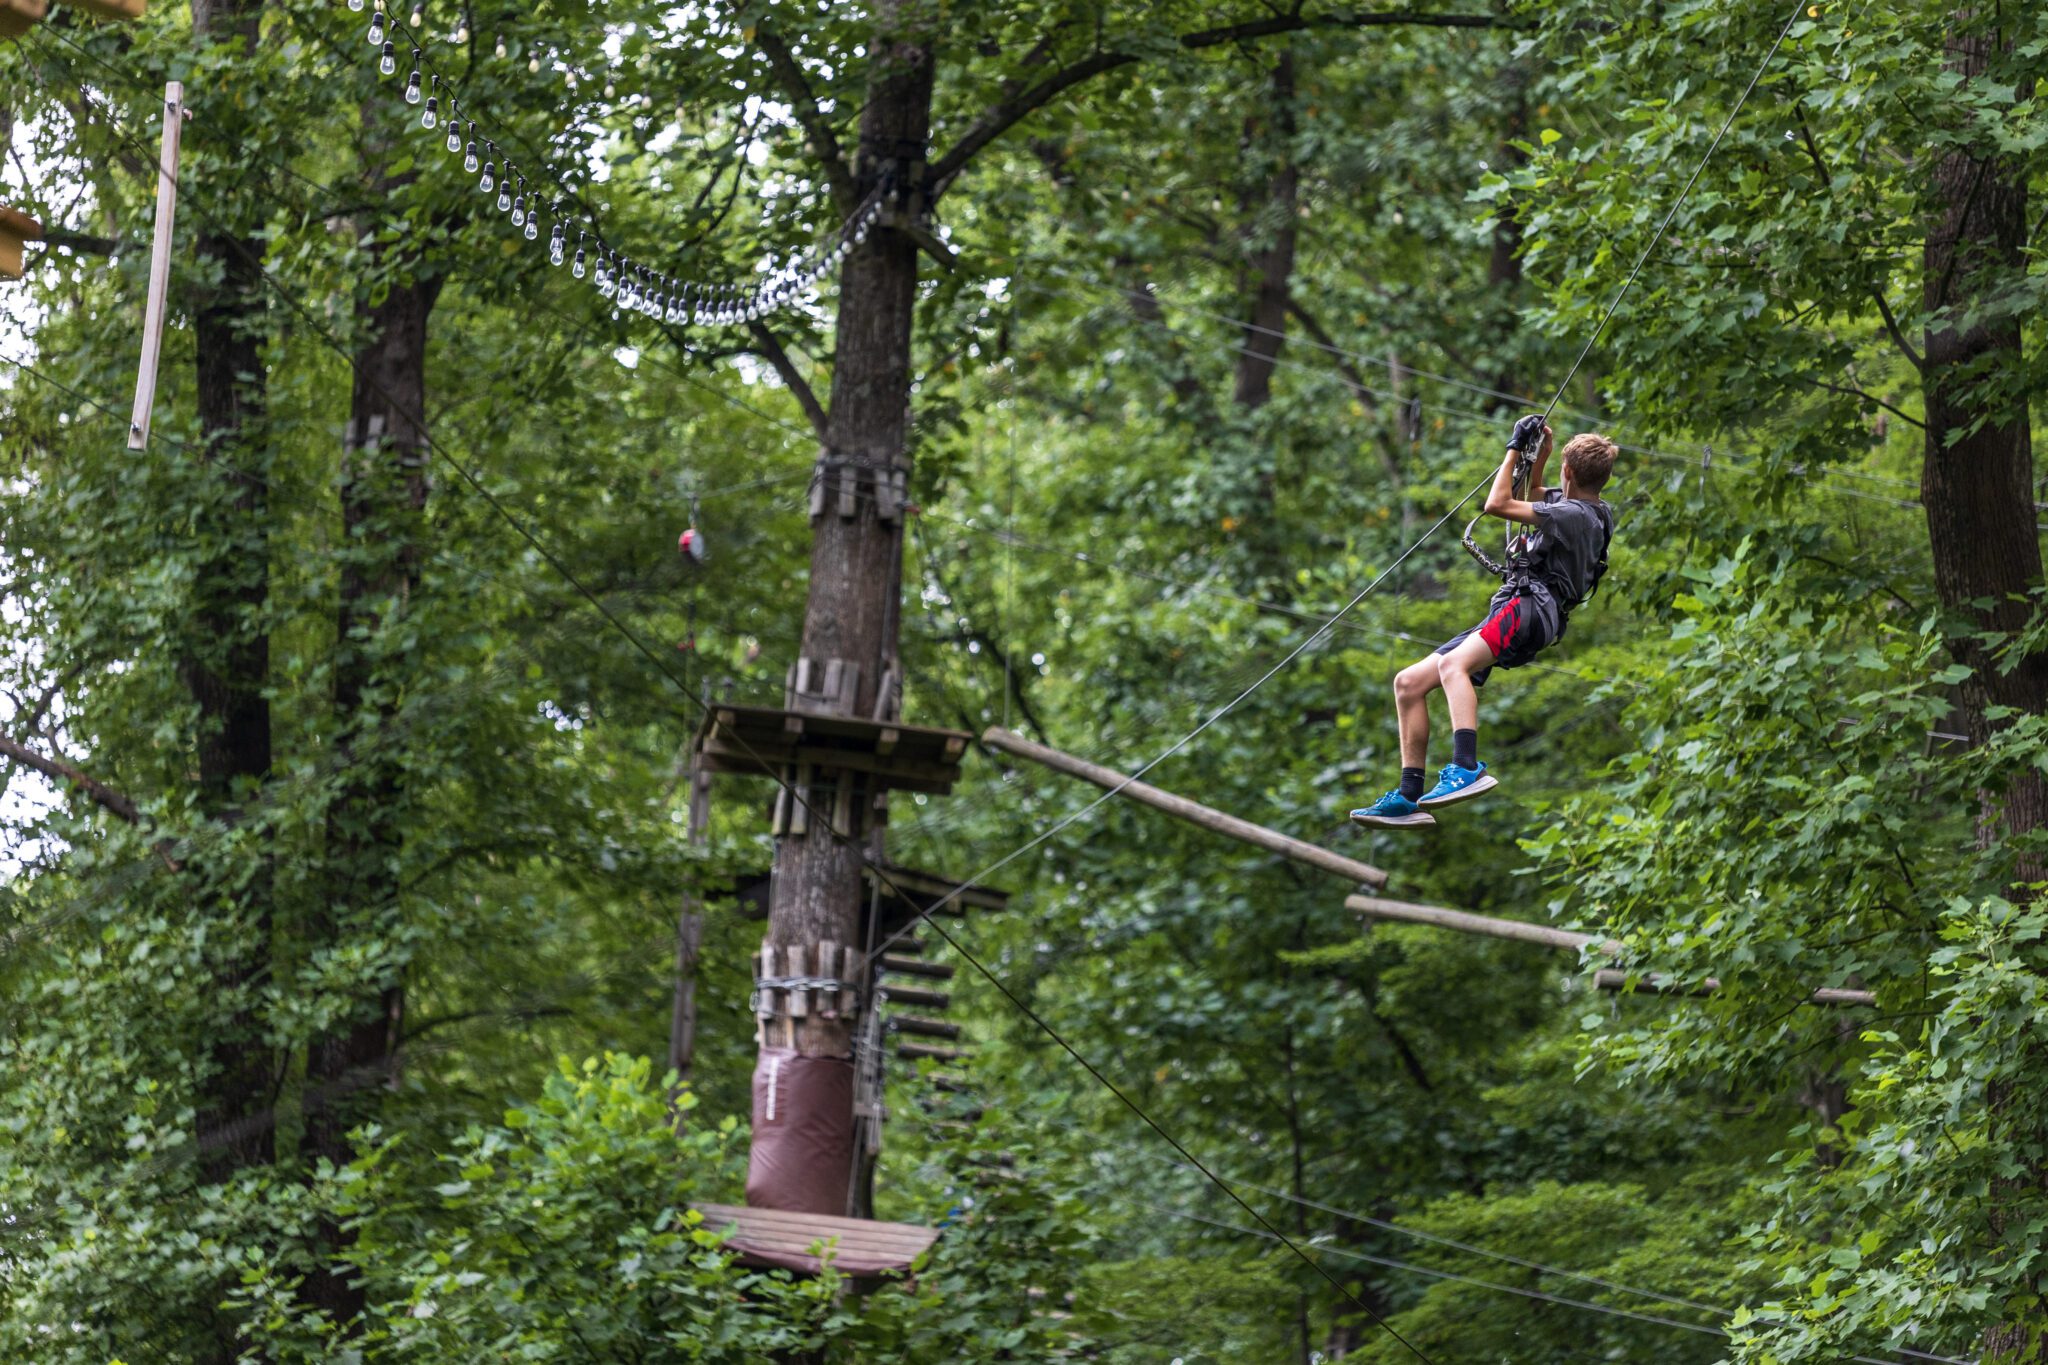 A boy on a zip line in the woods participates in the P.L.E.D.G.E. Leadership Program.